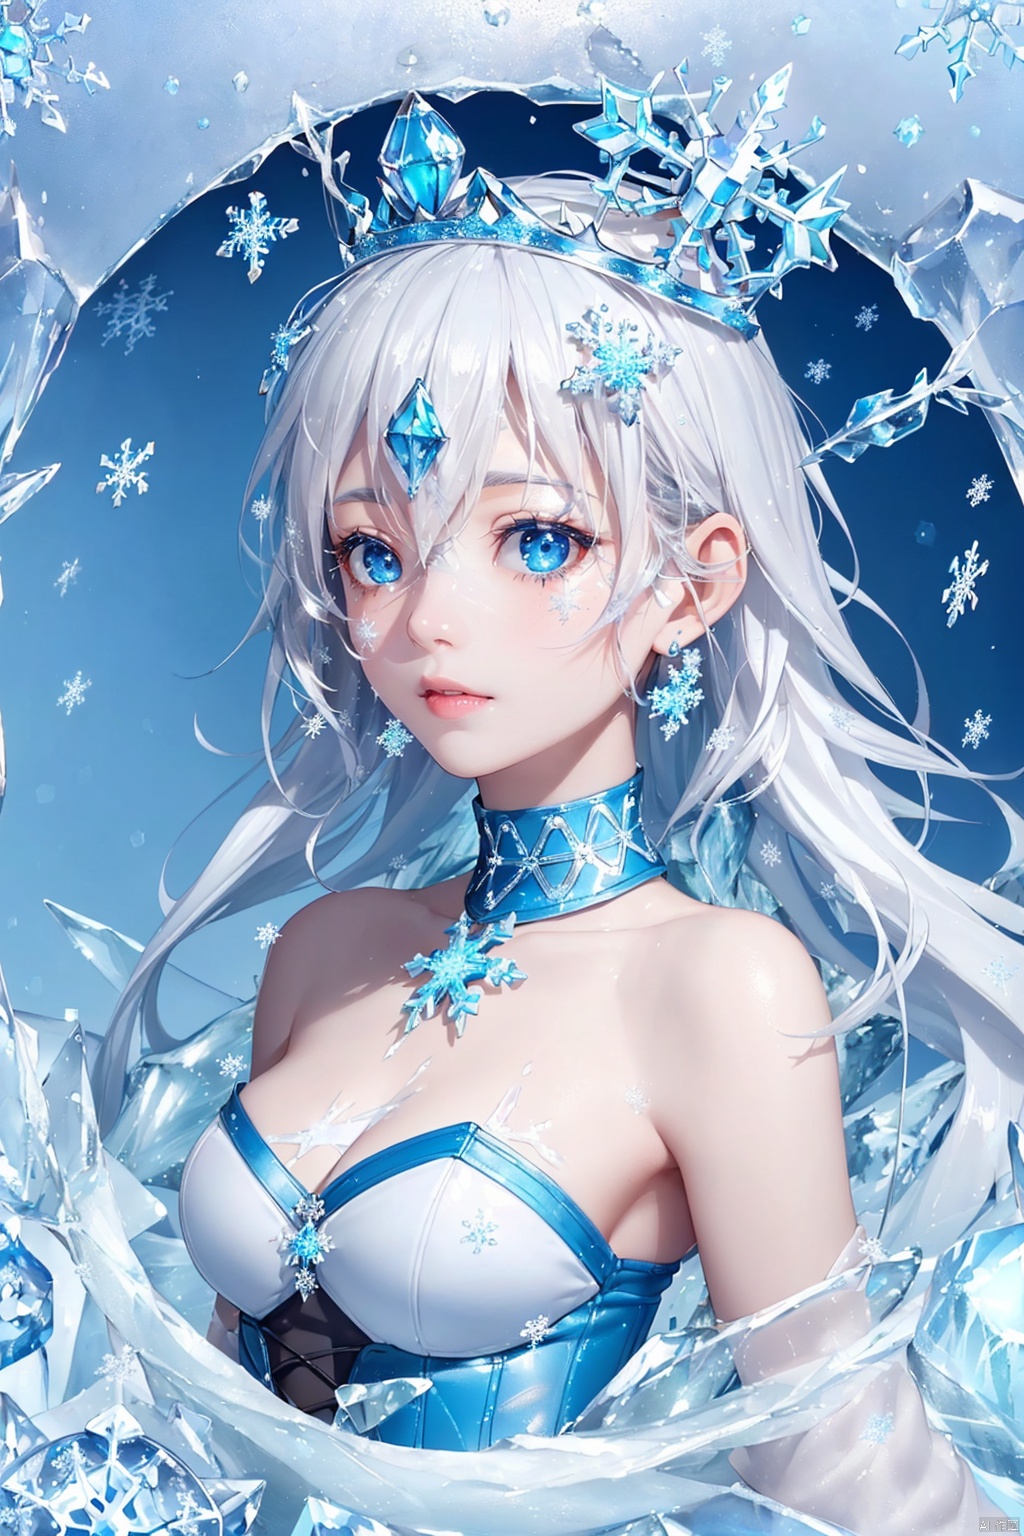 (detailed light), (an extremely delicate and beautiful), volume light, best shadow,cinematic lighting, flash, Depth of field, dynamic angle, (nsfw:0.8), Oily skin,
((ice-sculpture-loli)+(detailed eyes)+(detailed messy white ice-hair)+(Extremely delicate and beautiful ice-sculpture-loli)+(Ice-crystals-skin:1.4)+(detailed ice-Texture:1.4))+(Reflective snowflake-skin:1.3)+(blue bustier:1.35)+(Snowflakes on the skin:1.3)+(ice crystals on the skin:1.3)+(ice-snowflake-crown on head:1.25)+(snowflake)+(Cute anime face)+(bell collar:1.3)+(Medium breasts:1.2)+(Extremely delicate and beautiful)+(Flowing-ice:1.3),upper body,
(complexity),((detailed blue-fire-magic-circle background:1.3)+(Snowflake-concentric-circles:1.3))

